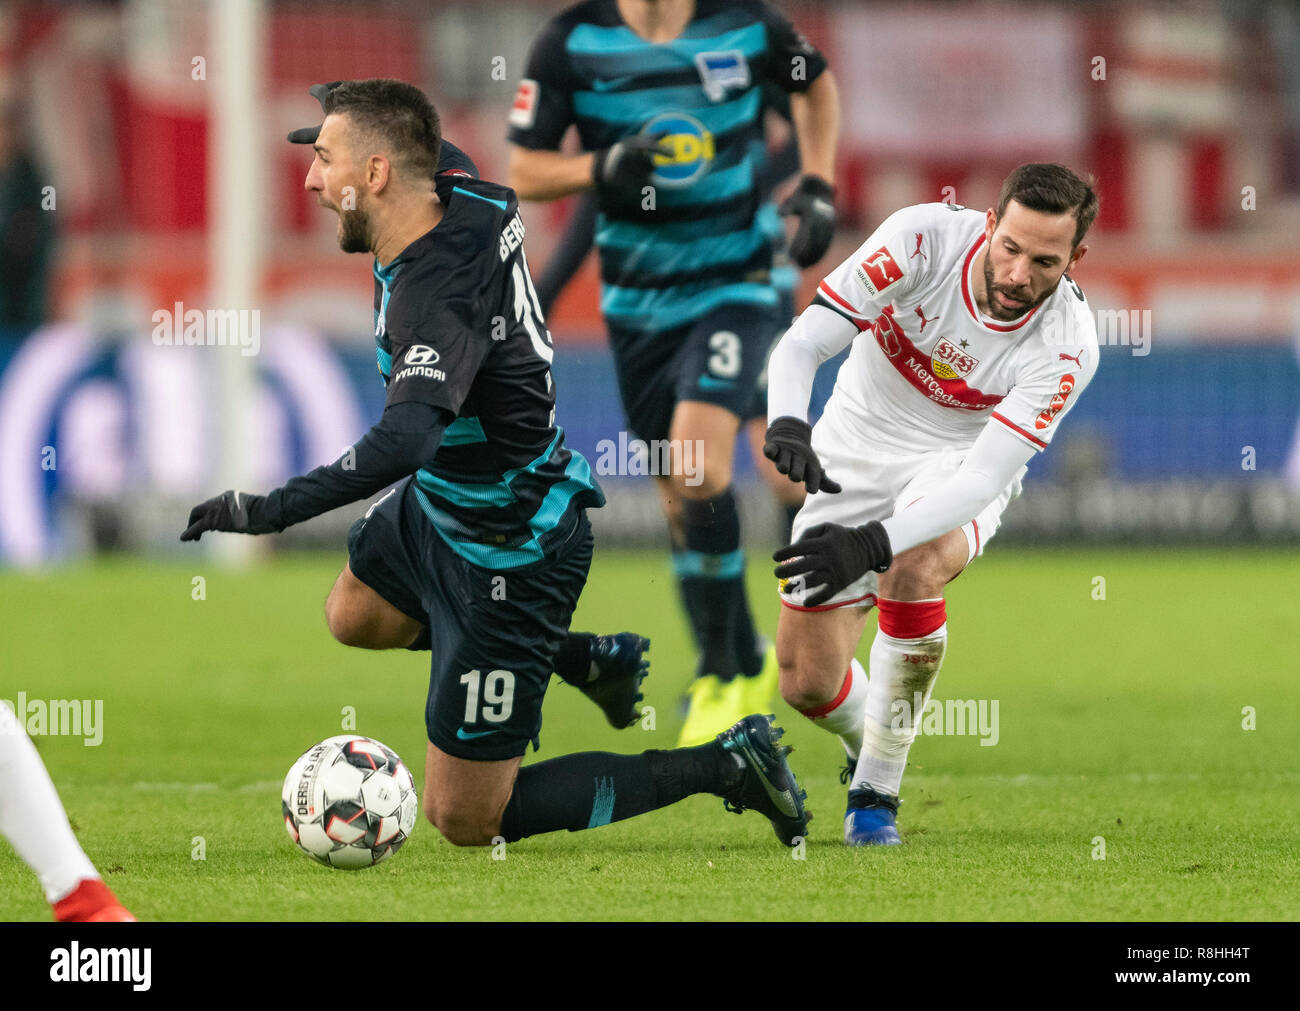 Stuttgart, Germany. 15th Dec, 2018. Soccer: Bundesliga, VfB Stuttgart - Hertha BSC, 15th matchday, Mercedes-Benz Arena : Stuttgart's Gonzalo Castro (r) and Herthas Vedad Ibisevic fight for the ball. Credit: Daniel Maurer/dpa - IMPORTANT NOTE: In accordance with the requirements of the DFL Deutsche Fußball Liga or the DFB Deutscher Fußball-Bund, it is prohibited to use or have used photographs taken in the stadium and/or the match in the form of sequence images and/or video-like photo sequences./dpa/Alamy Live News Stock Photo